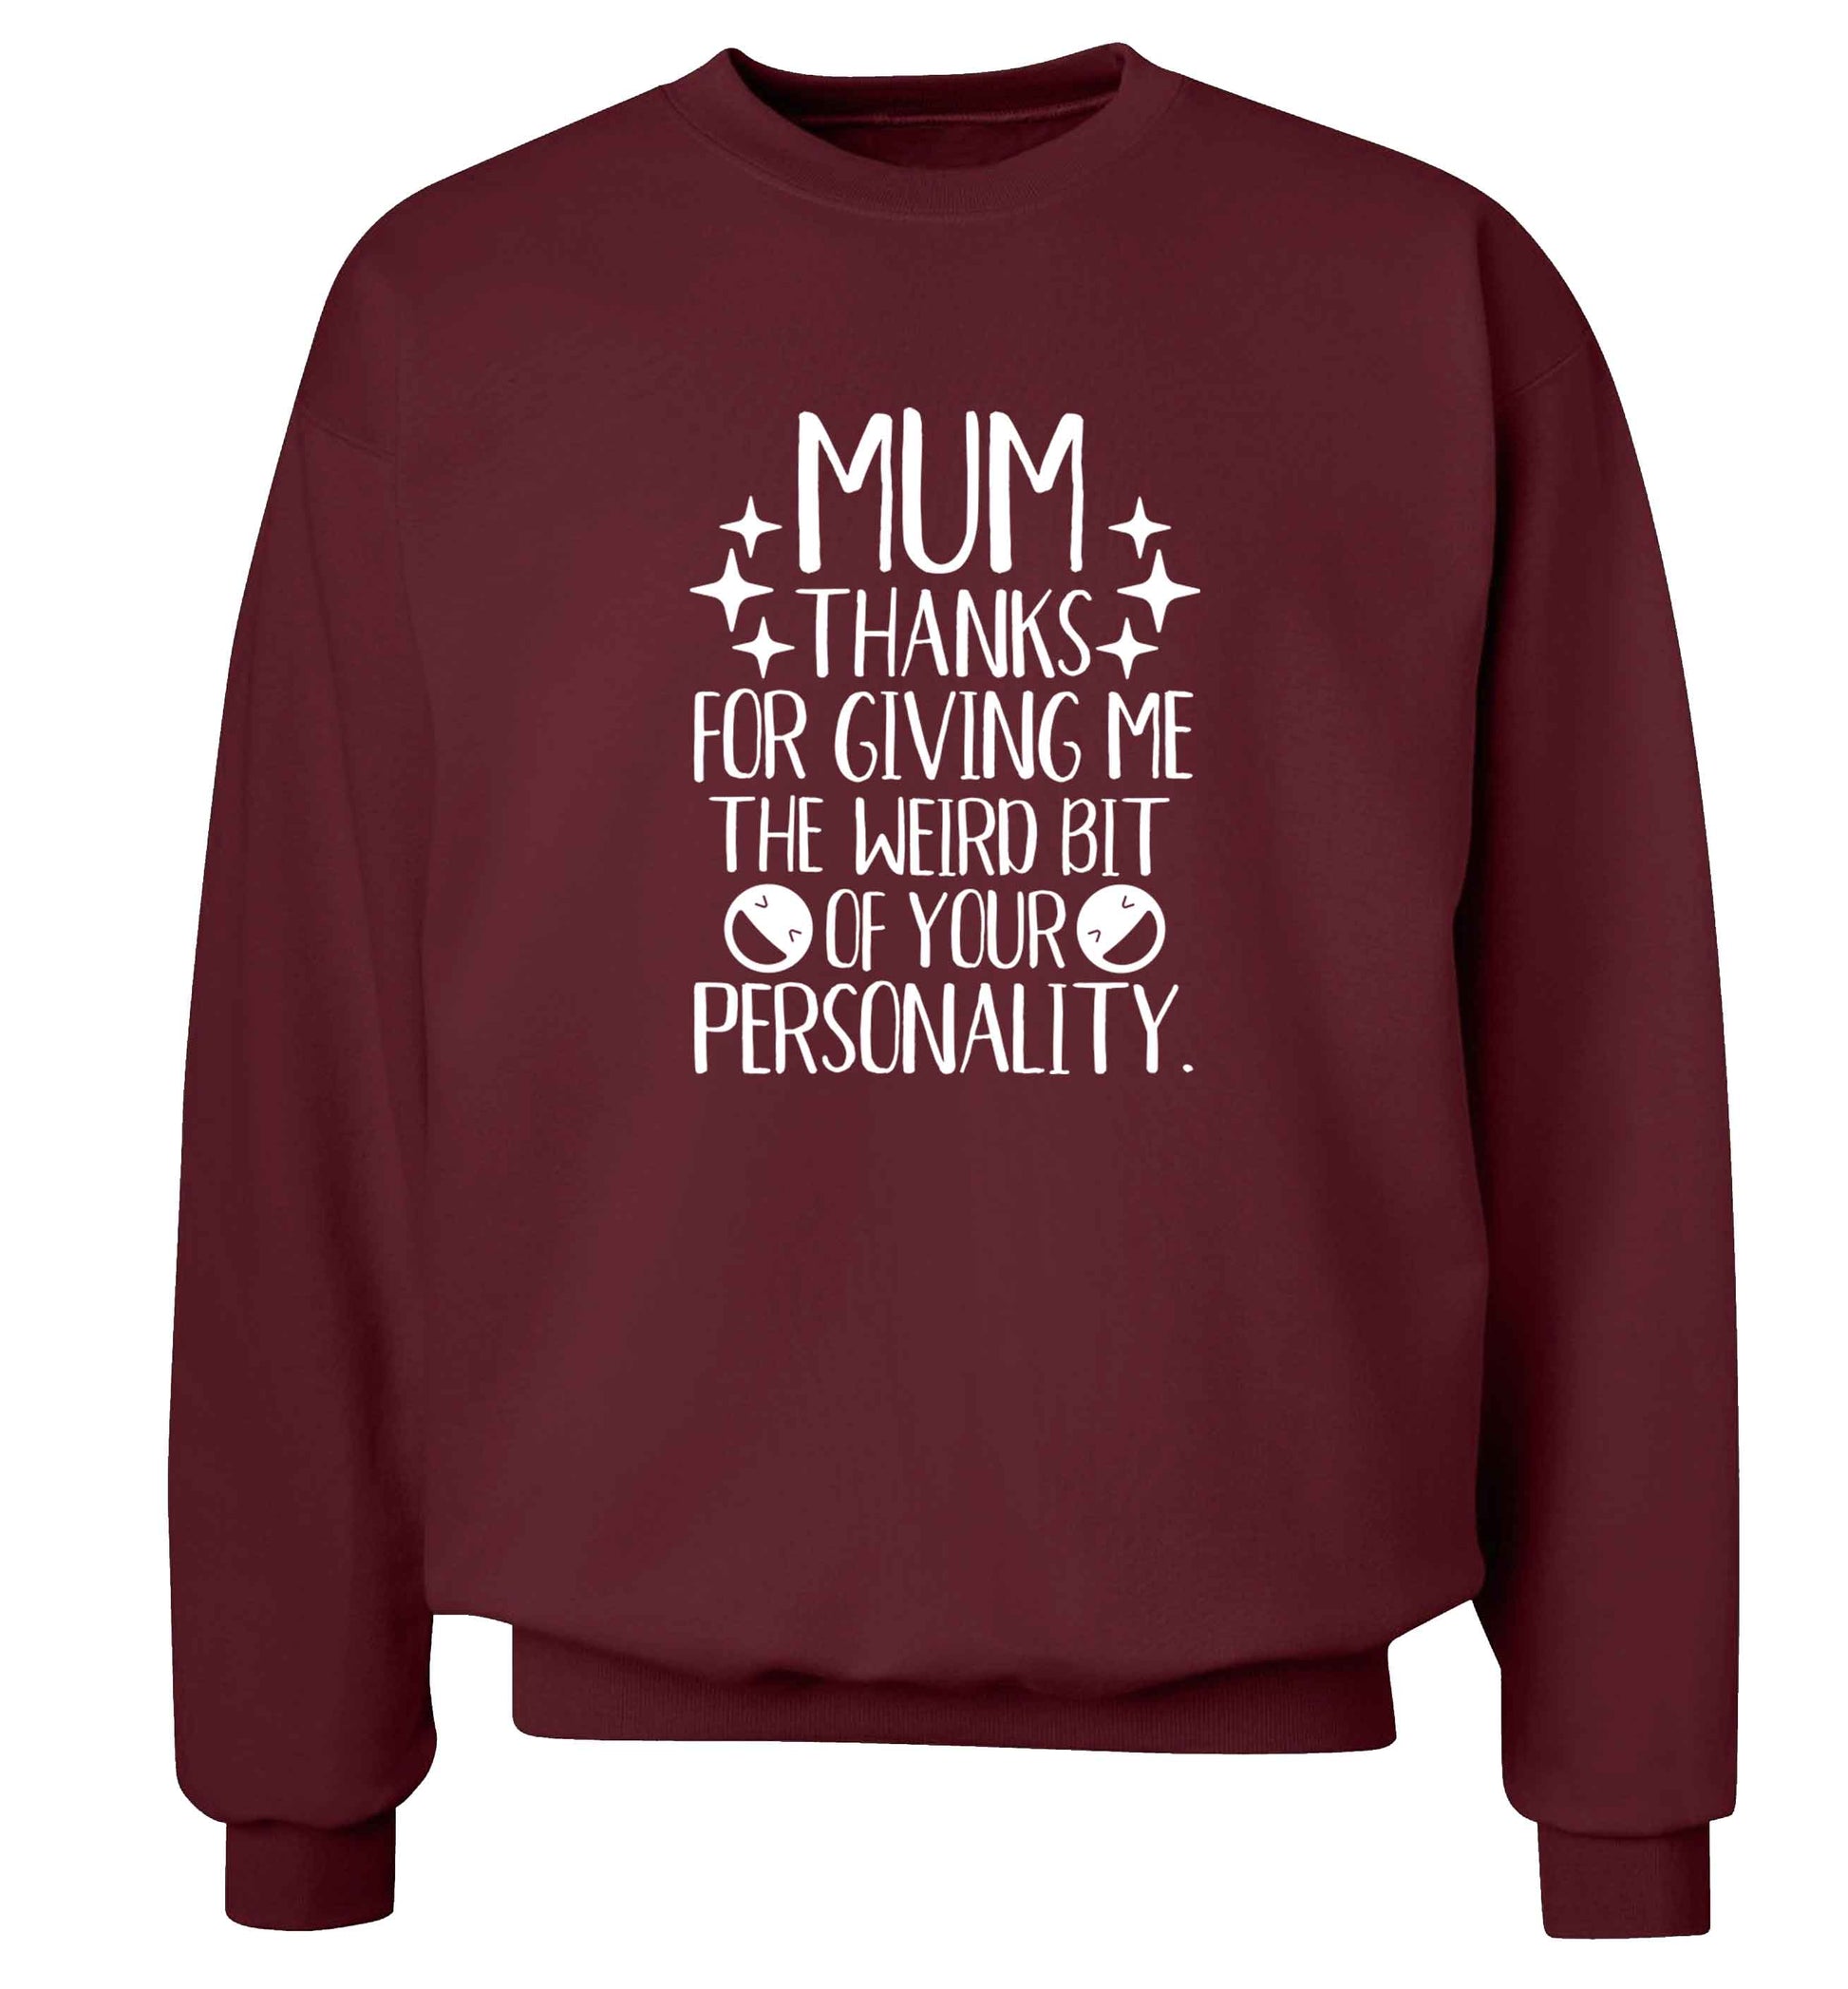 Mum thanks for giving me the weird bit of your personality adult's unisex maroon sweater 2XL